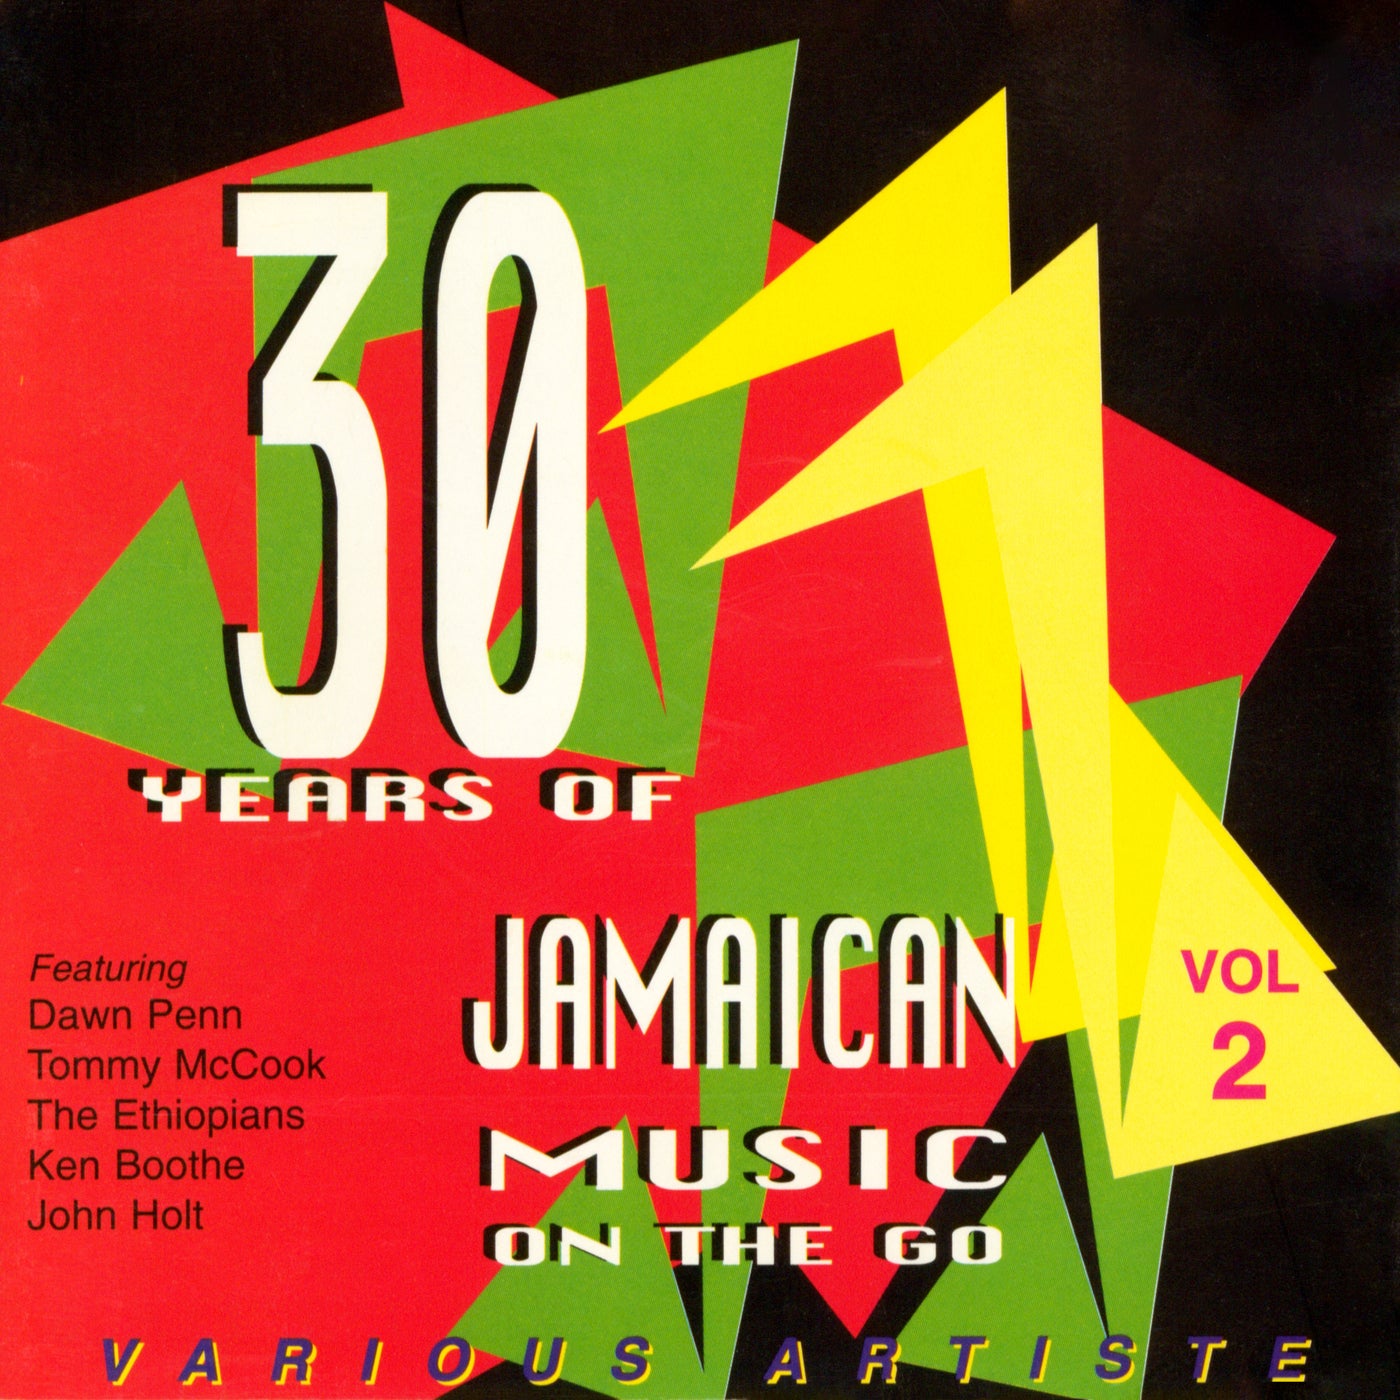 30 Years of Jamaican Music on the Go, Vol. 2 by The Skatalites